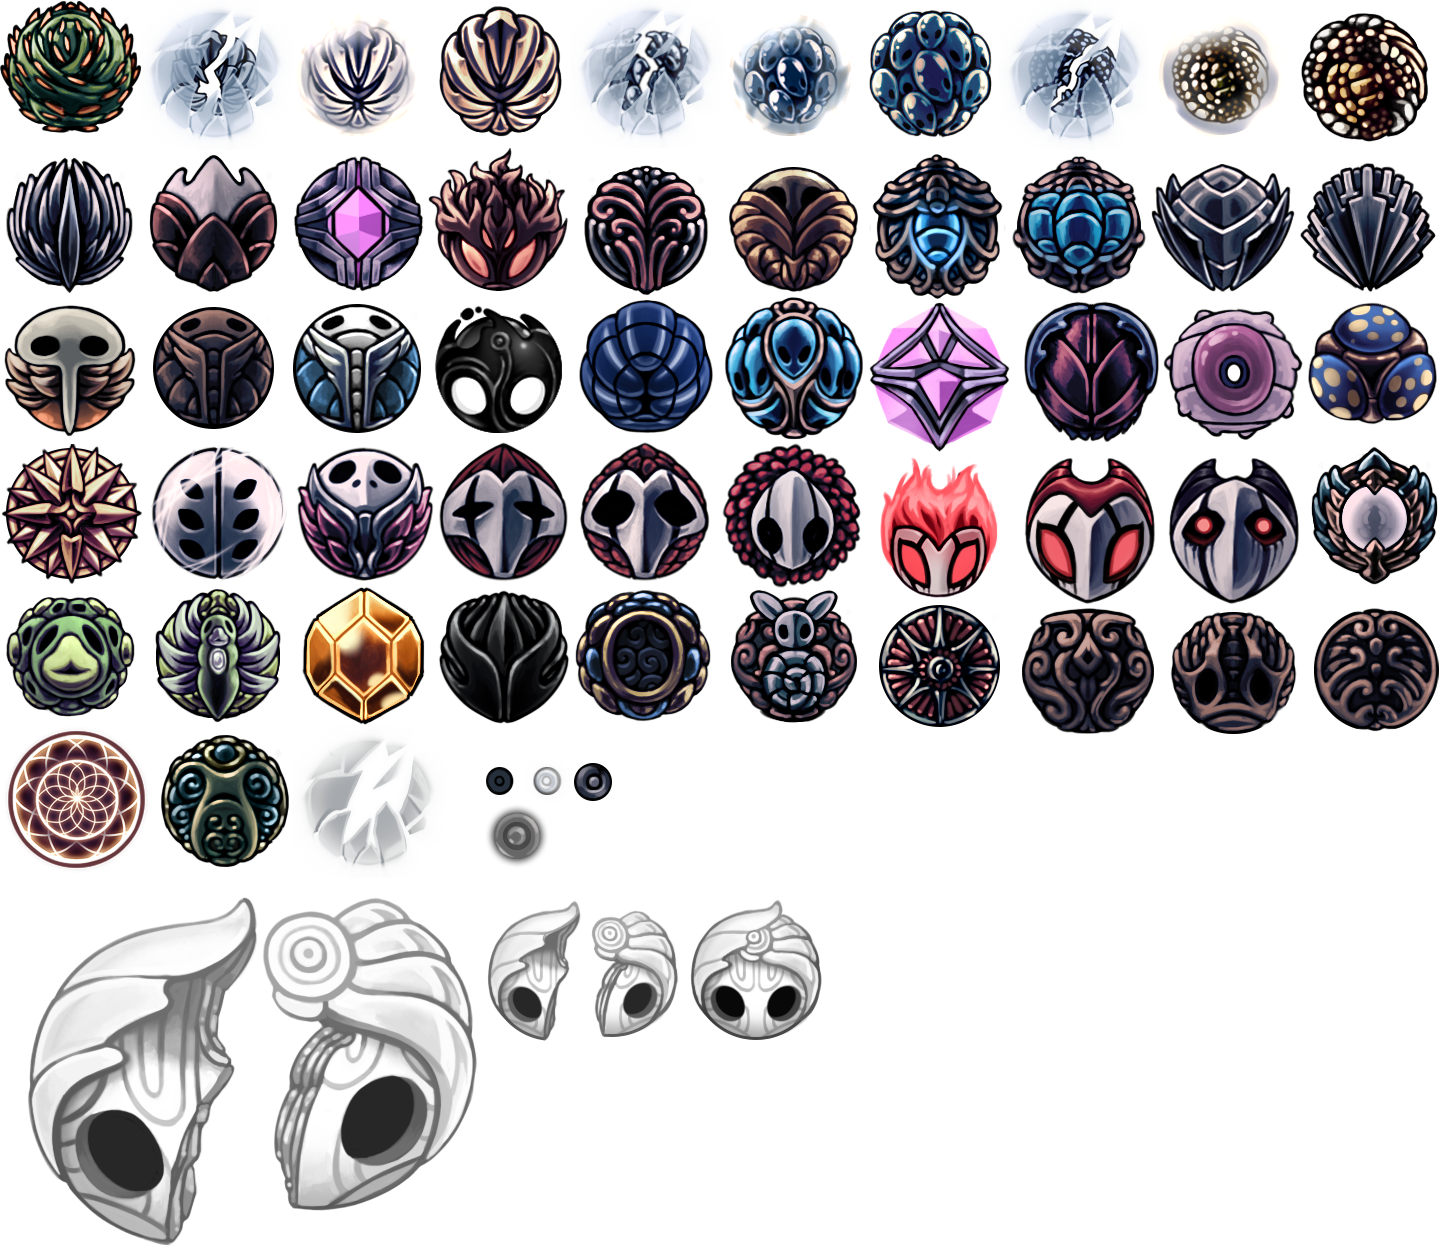 hollow knight charms map